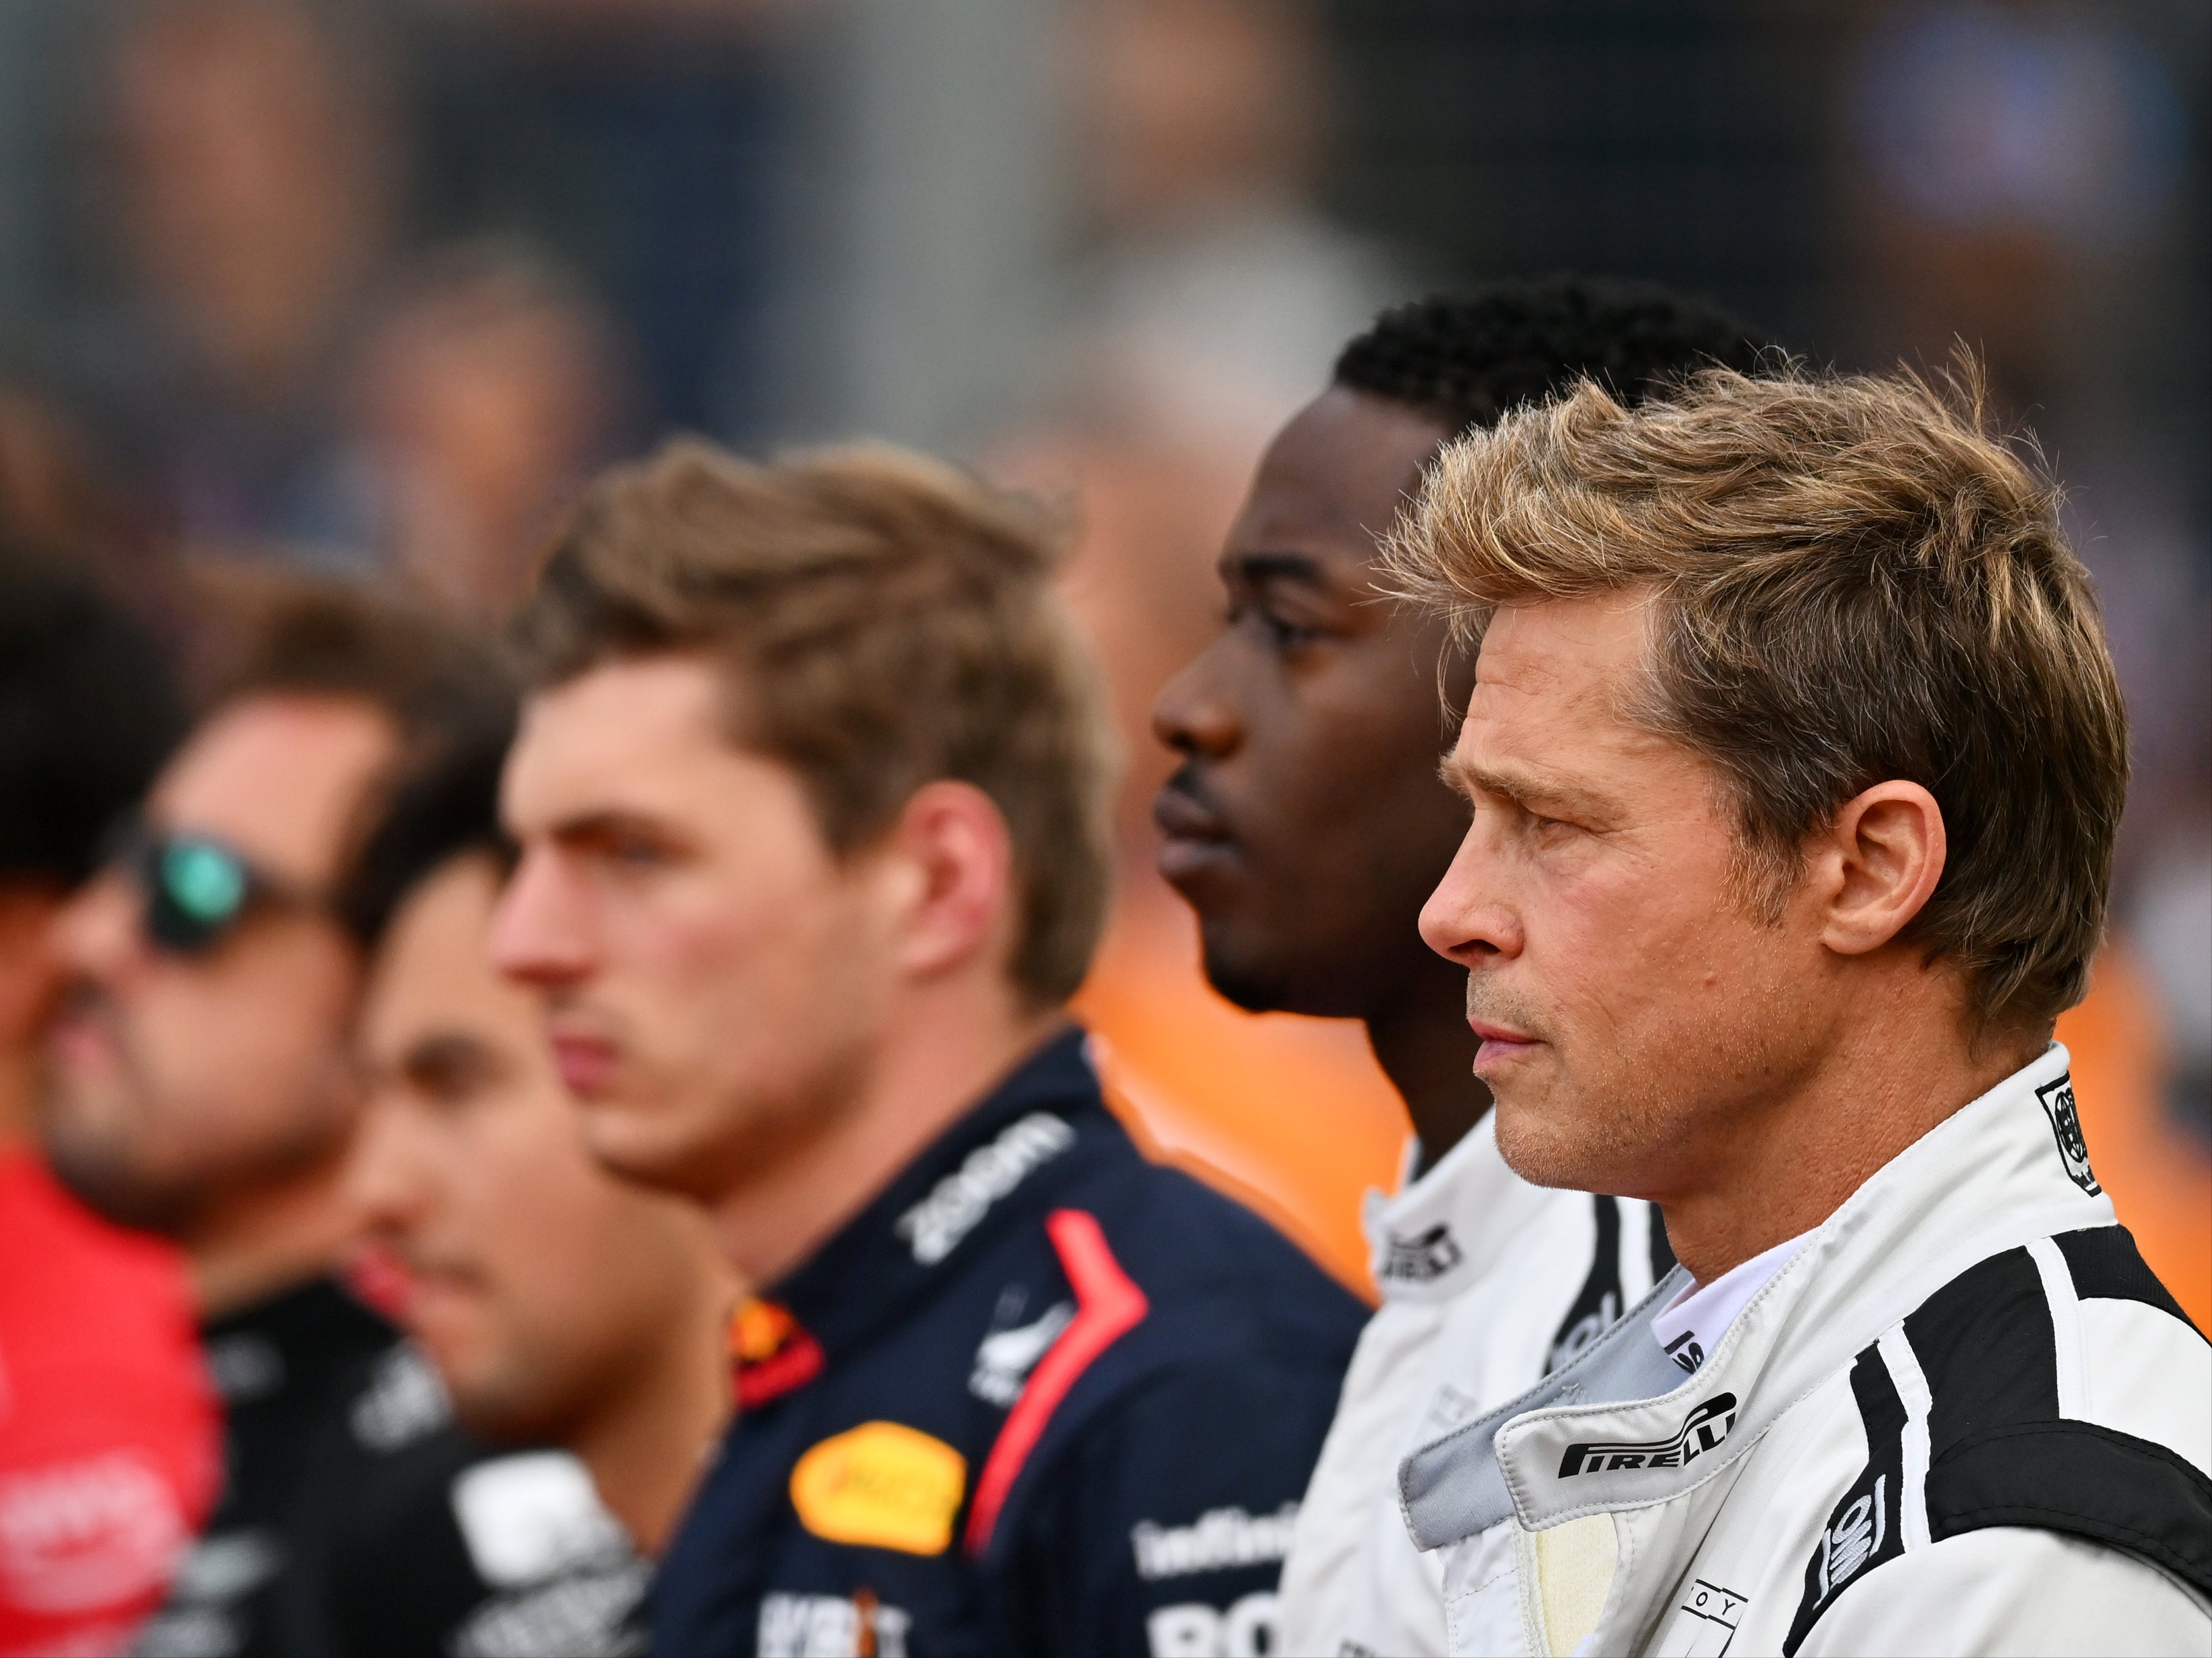 Brad Pitt and co-star Damson Idris stand for the national anthem on the grid during the F1 Grand Prix of Great Britain at Silverstone Circuit